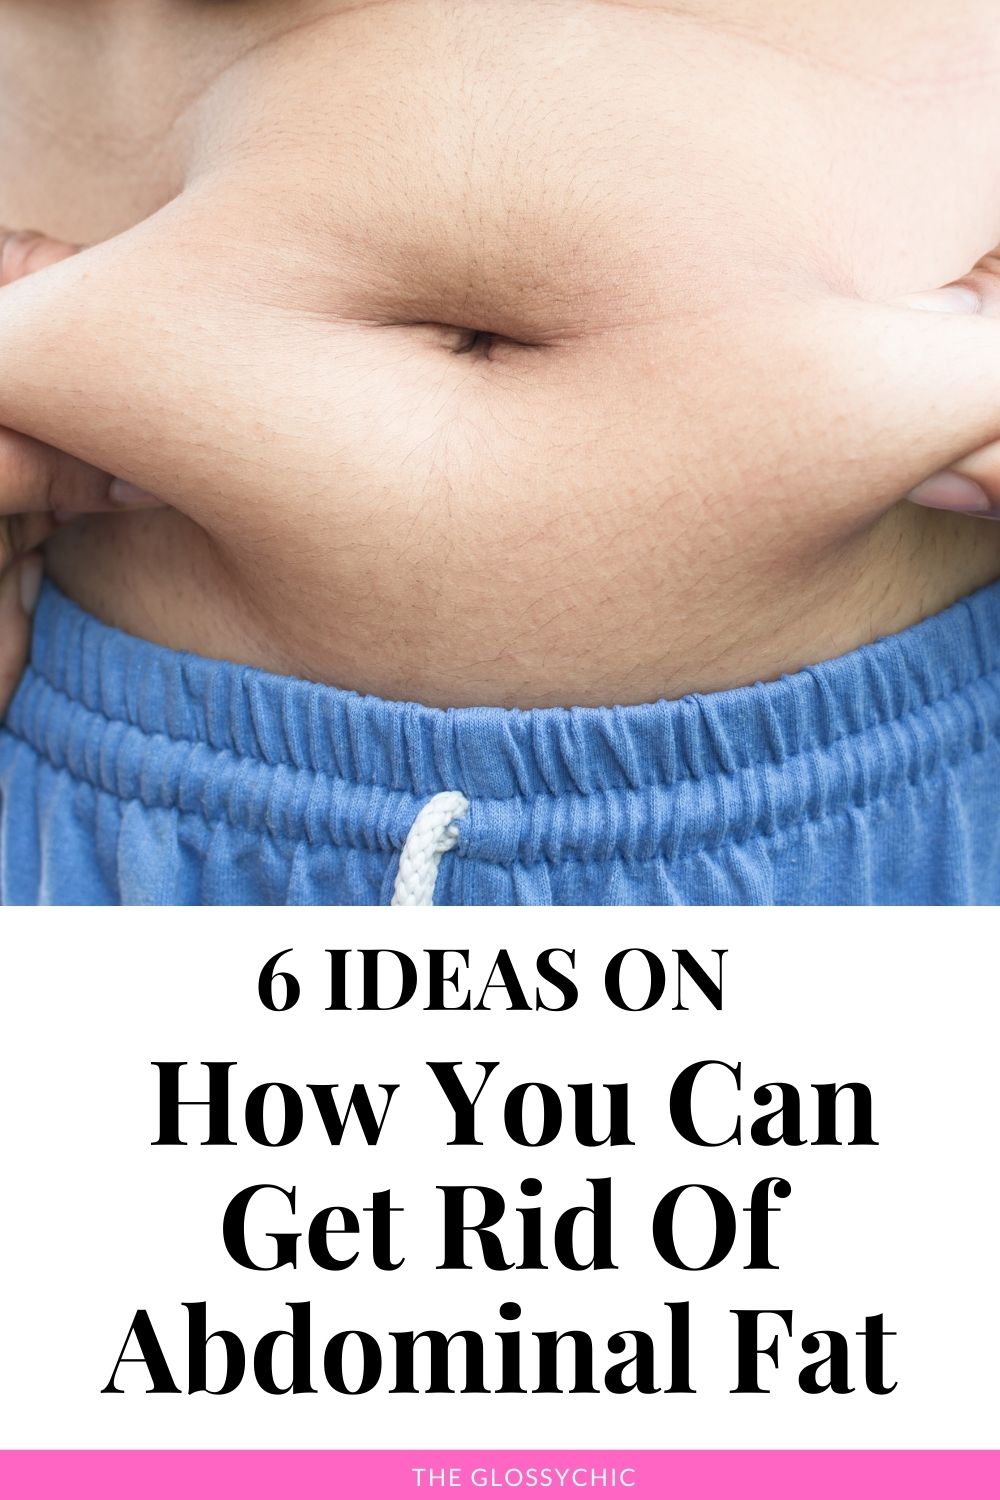 6 Ideas On How You Can Get Rid Of Abdominal Fat